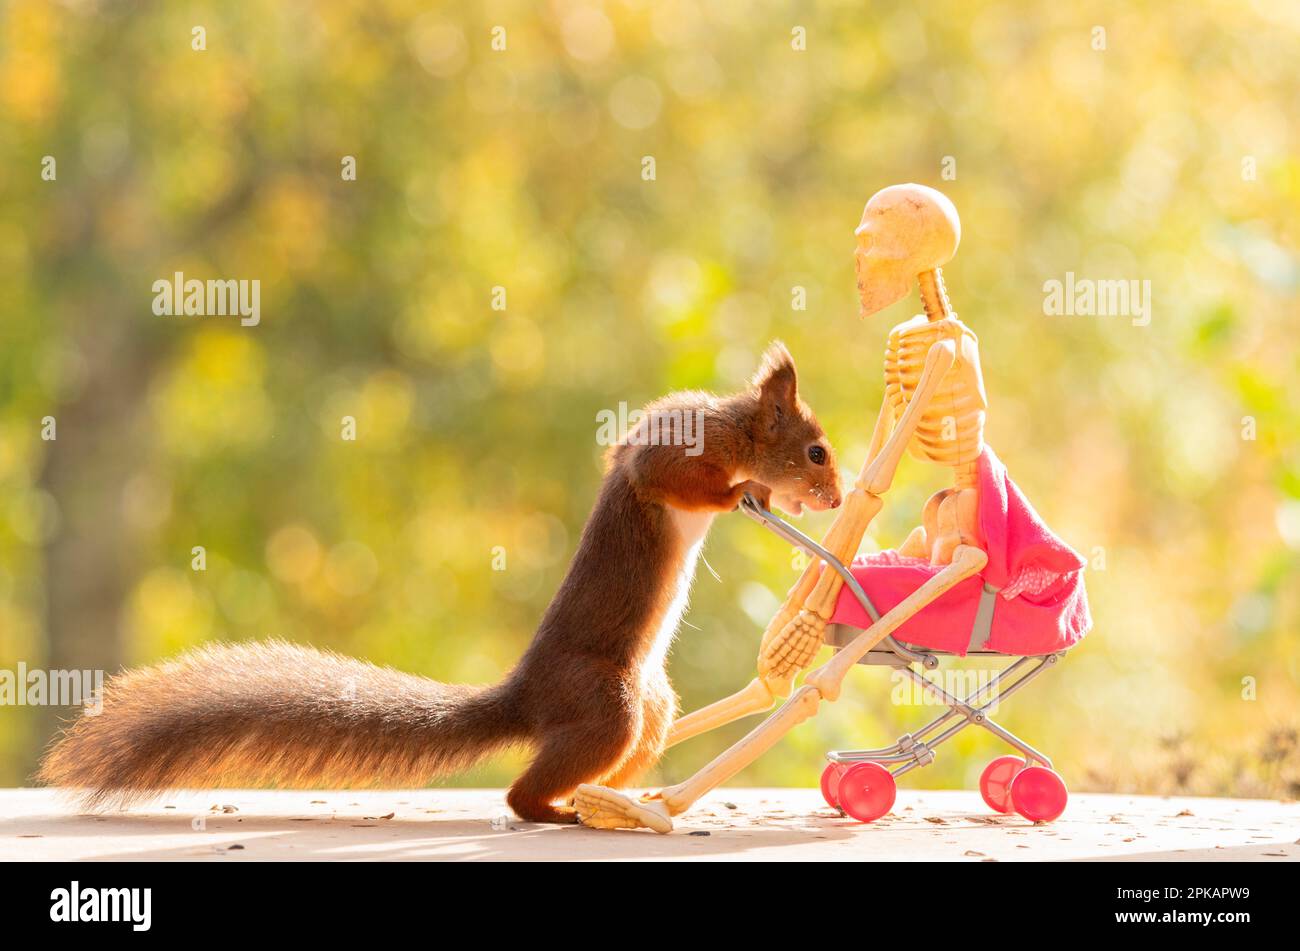 Skeleton in a baby carriage, squirrel pushes it Stock Photo